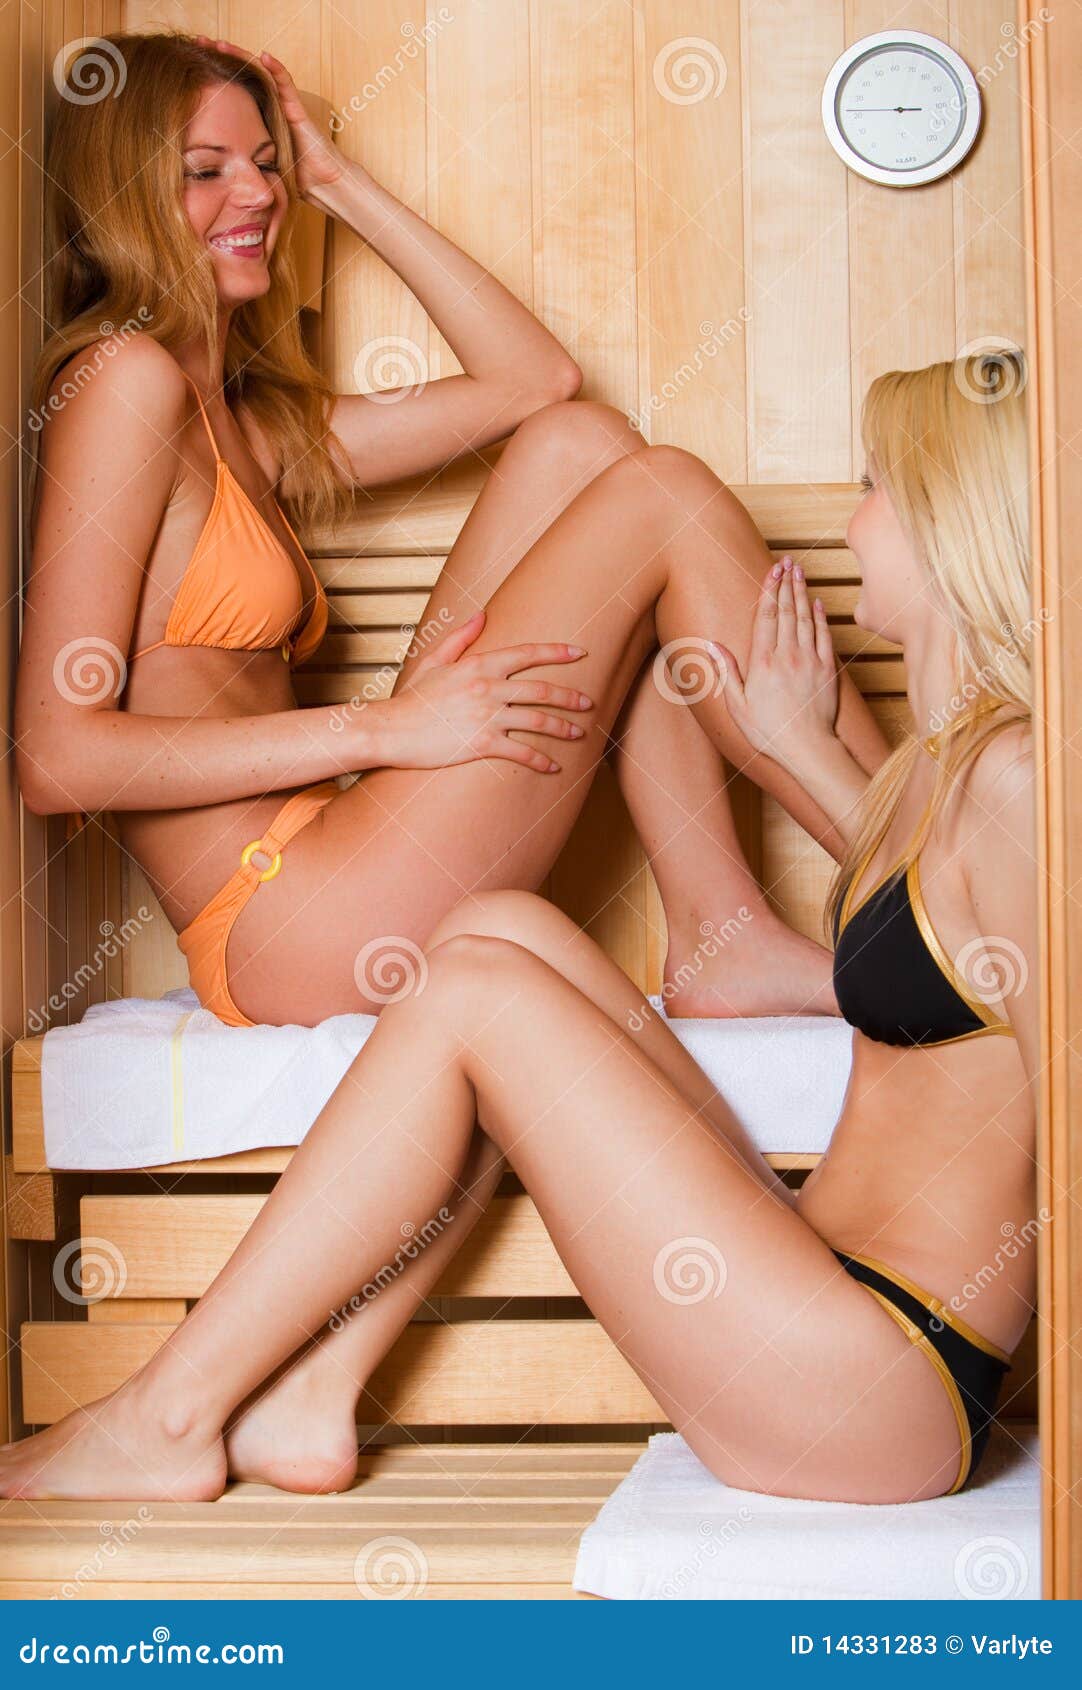 Two Women in a Dry Sauna stock image photo